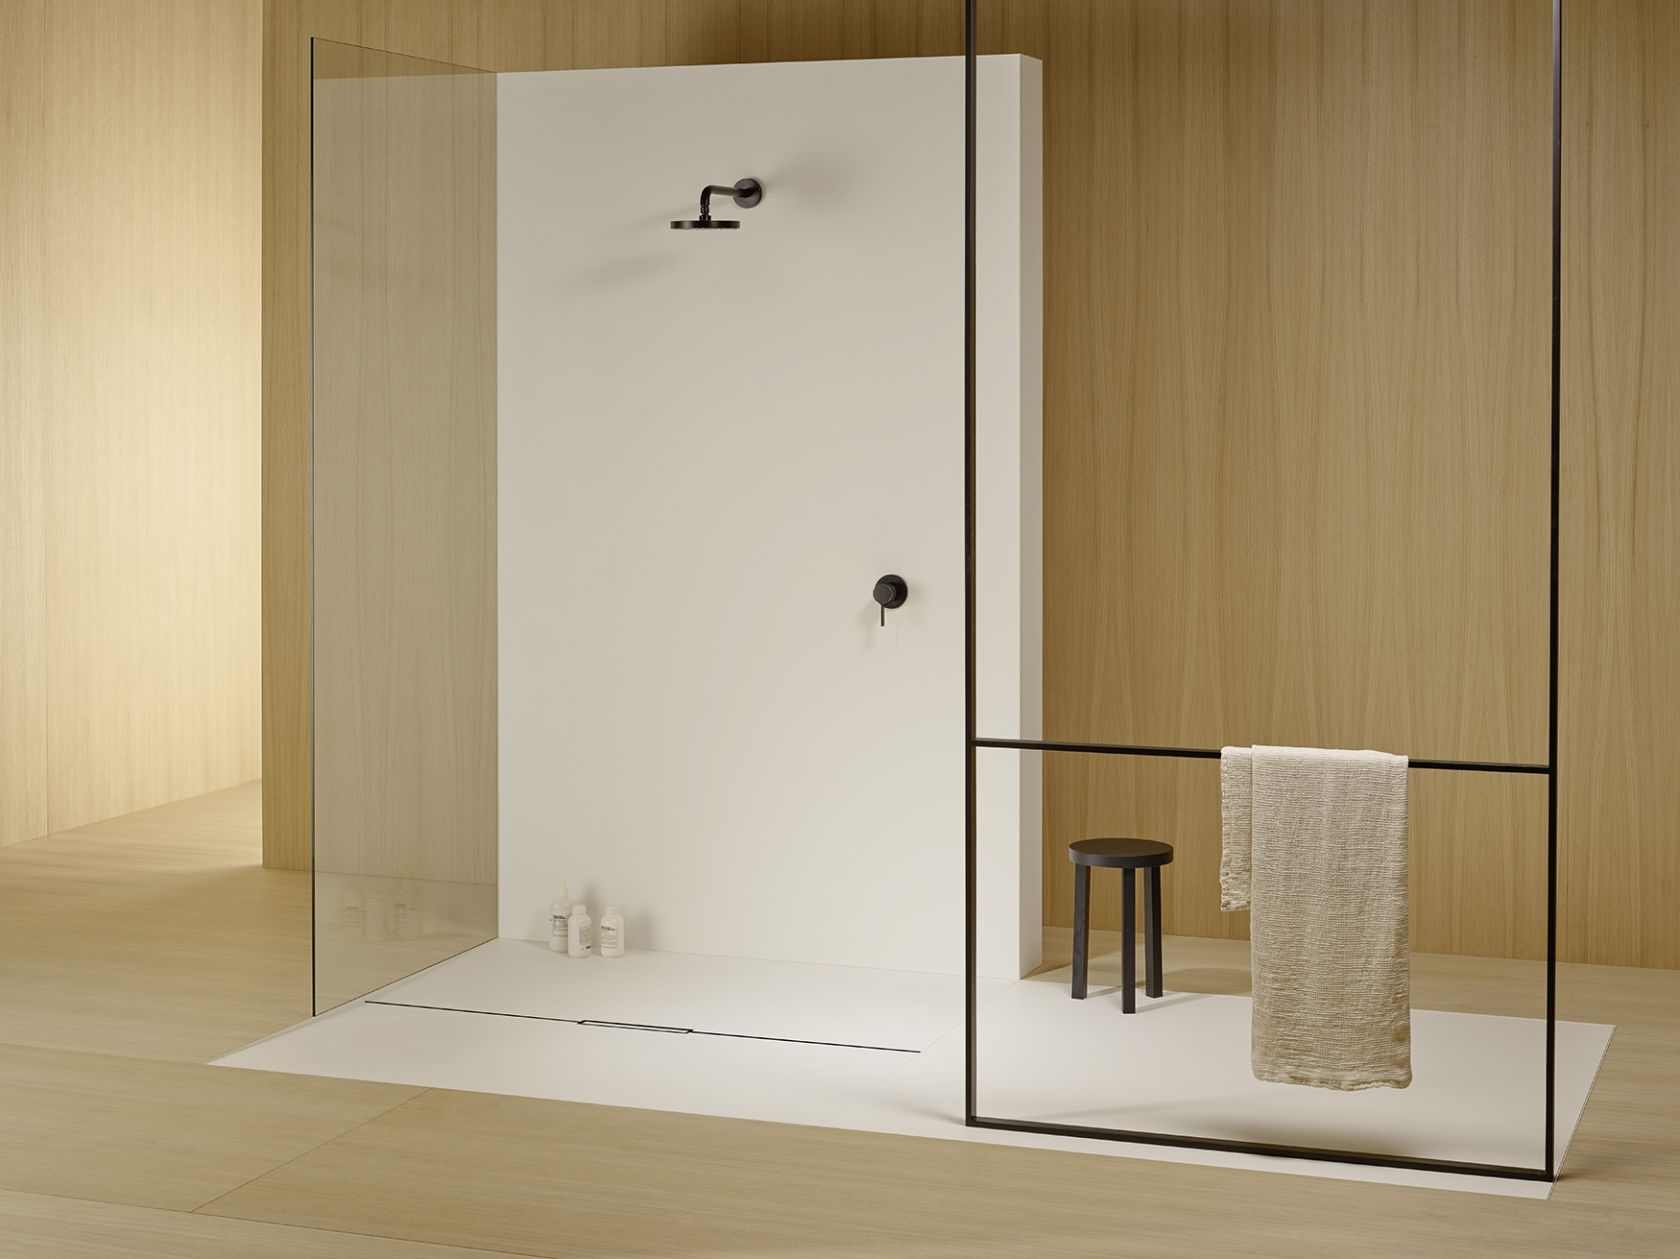 CeraFloor Individual is the elegant shower channel for flush-in-floor installation that boasts outstanding design and leading-edge technology.